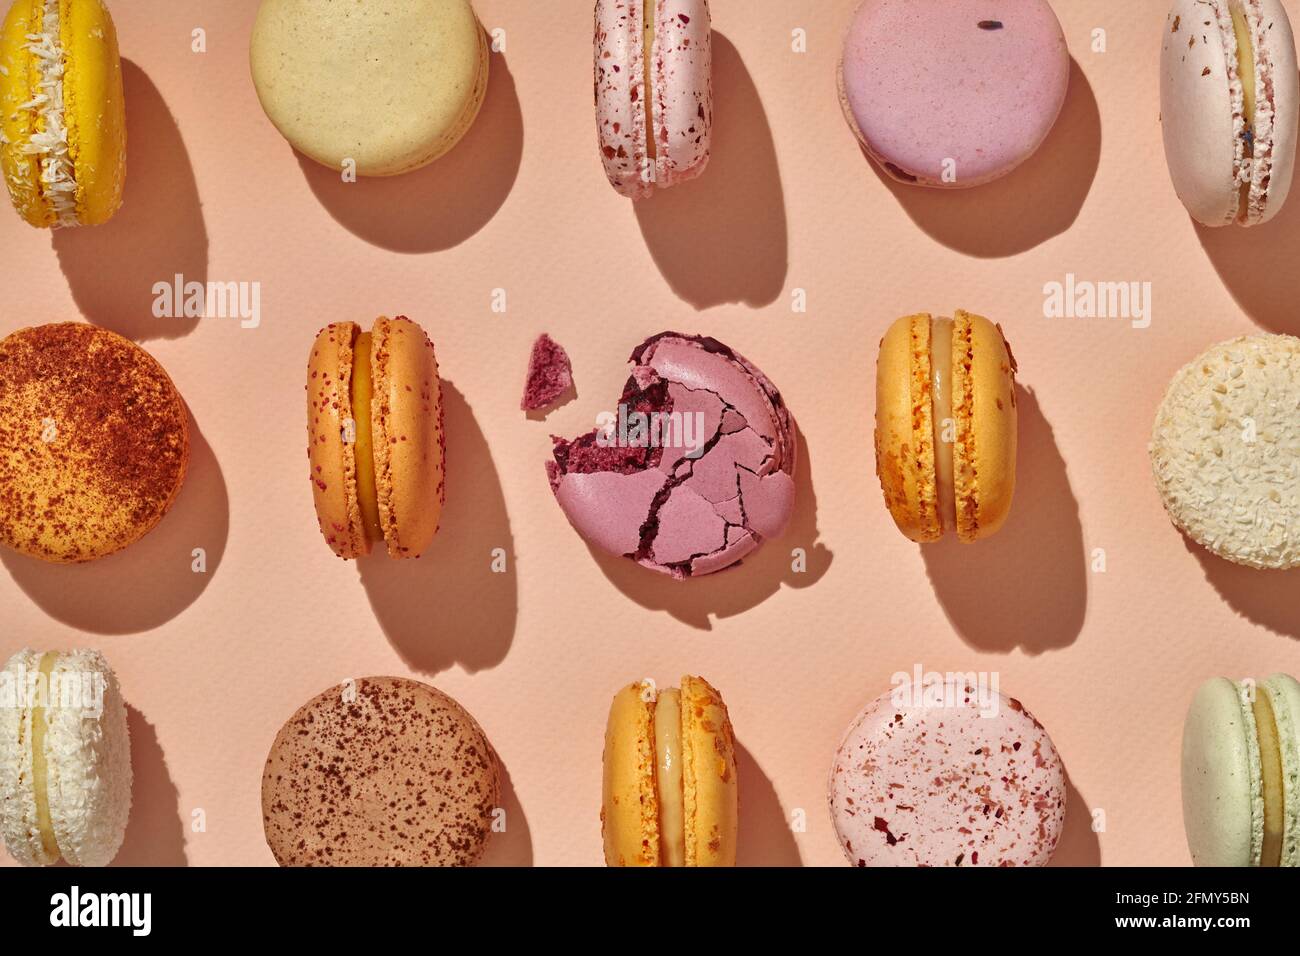 Top view of whole macarons and one bitten in center on pink background Stock Photo